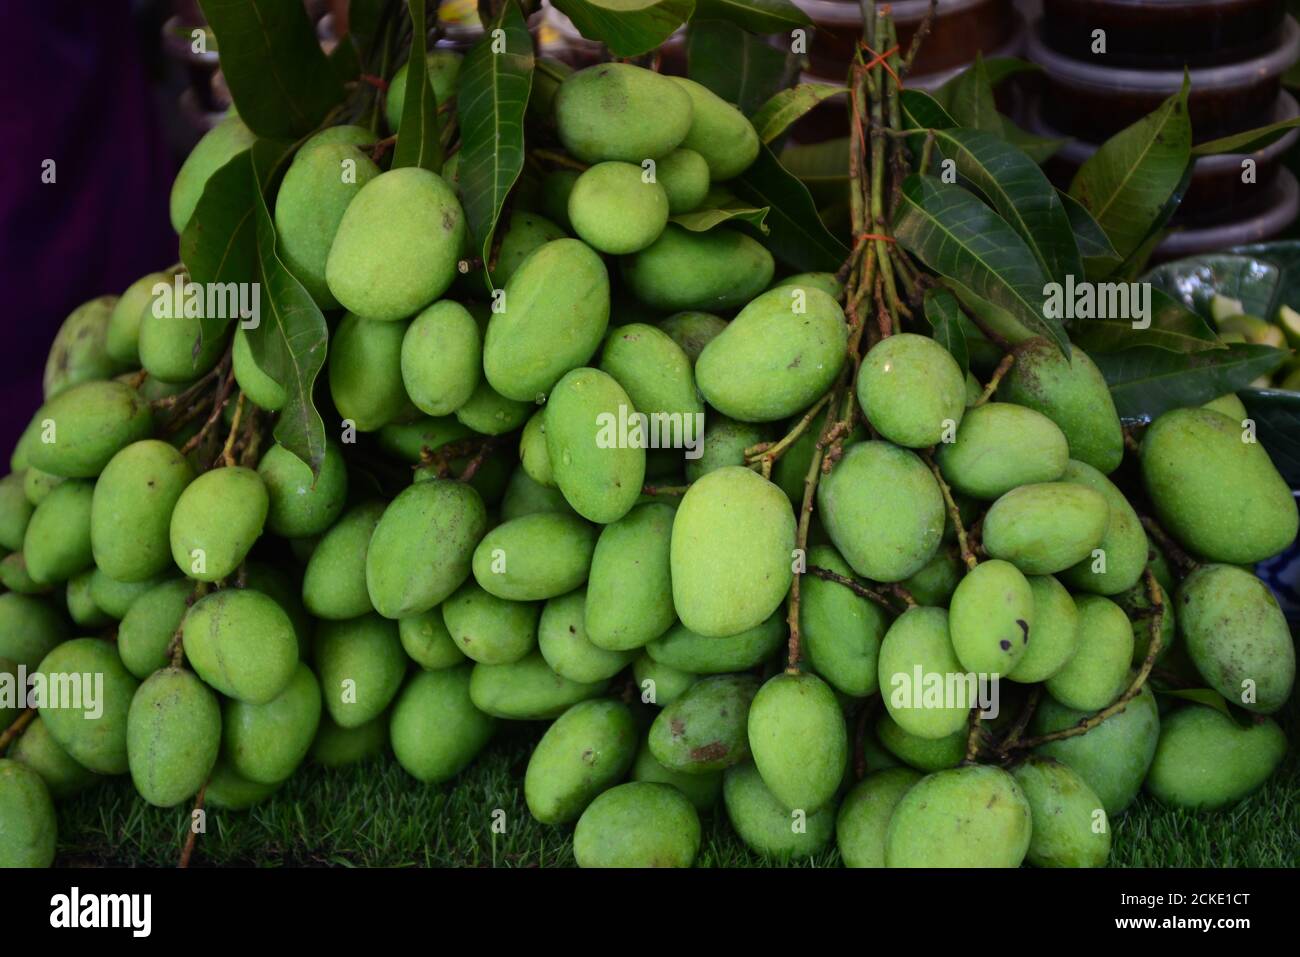 Mango fruit (MANGIFERA INDICA ) commonly known as mango, is a species of flowering plant in the sumac and poison ivy family Anacardiaceae. Stock Photo